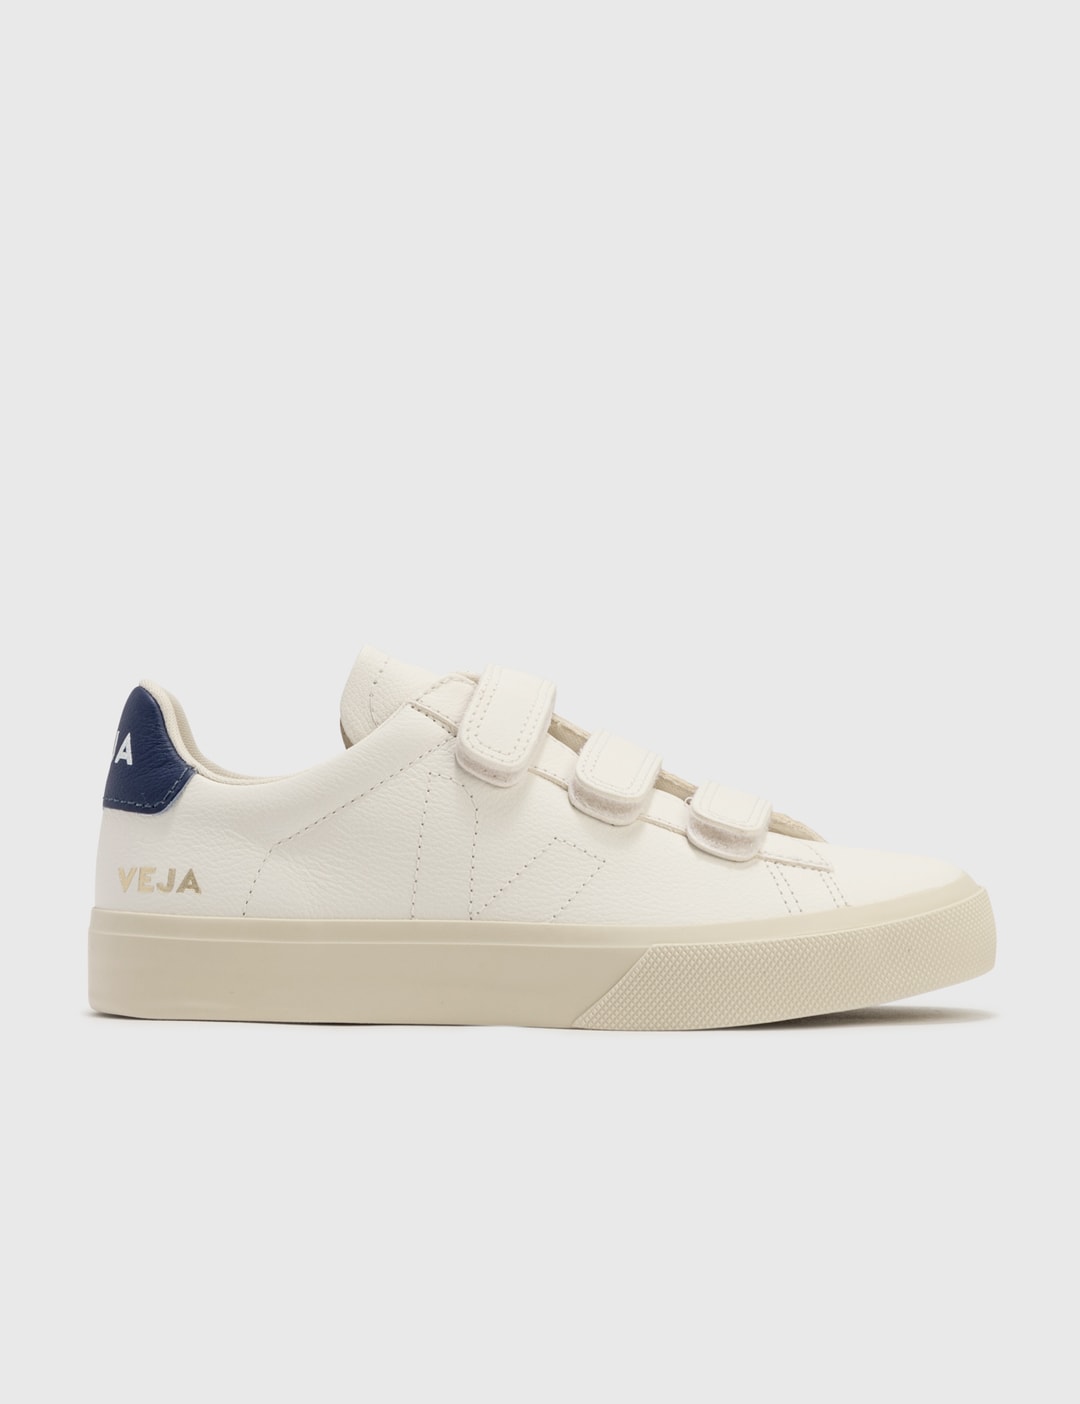 Veja - Recife Sneaker | HBX - Globally Curated Fashion and Lifestyle by ...